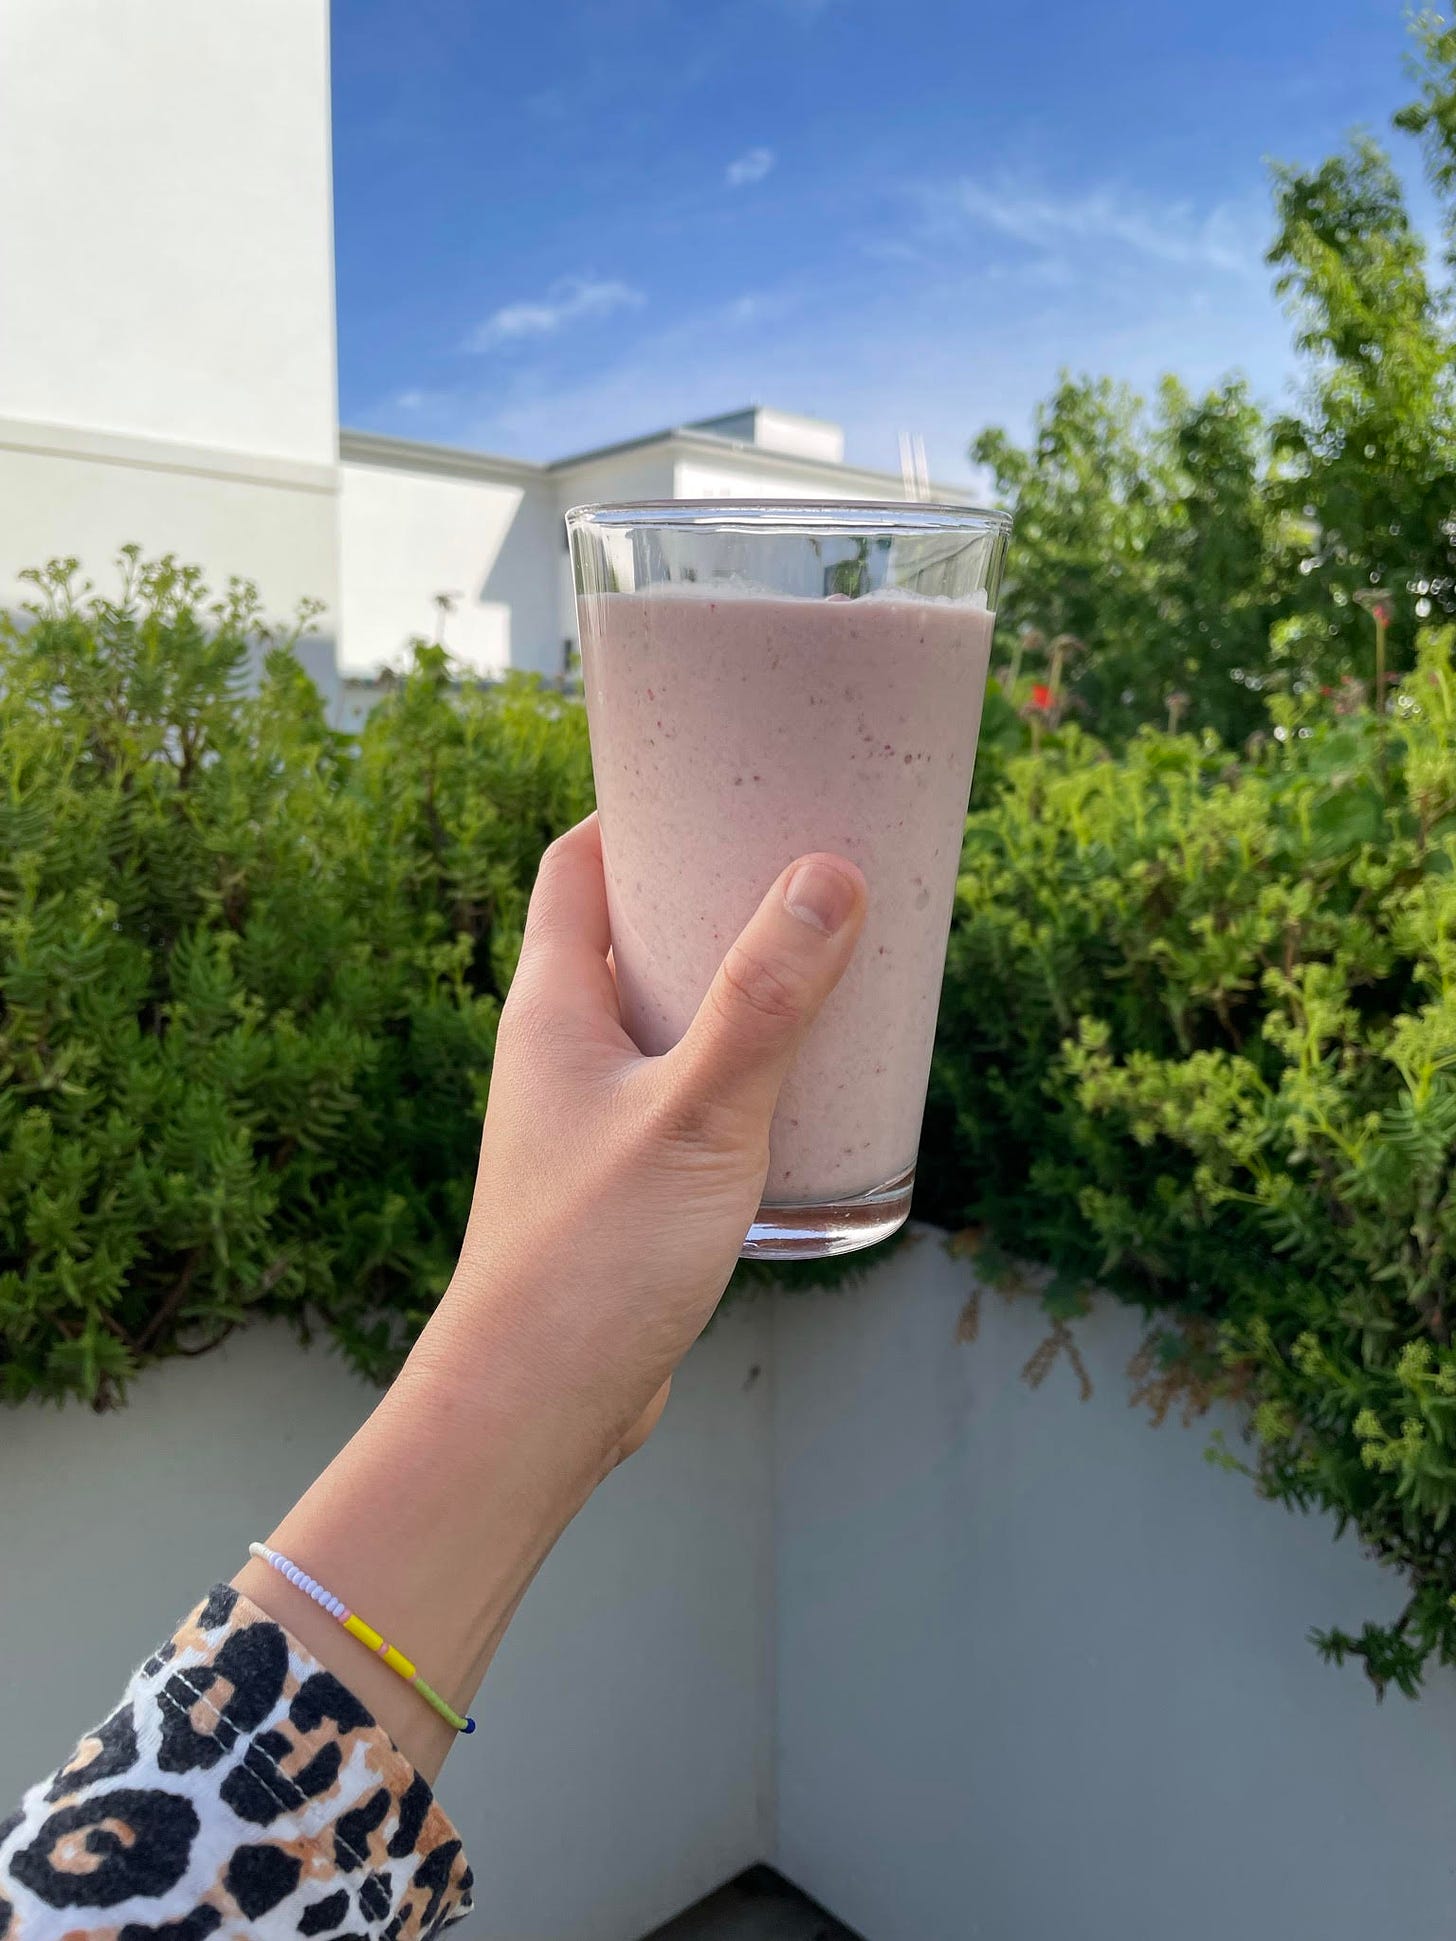 A strawberry smoothie held against the backdrop of flower boxes on a sunny balcony.